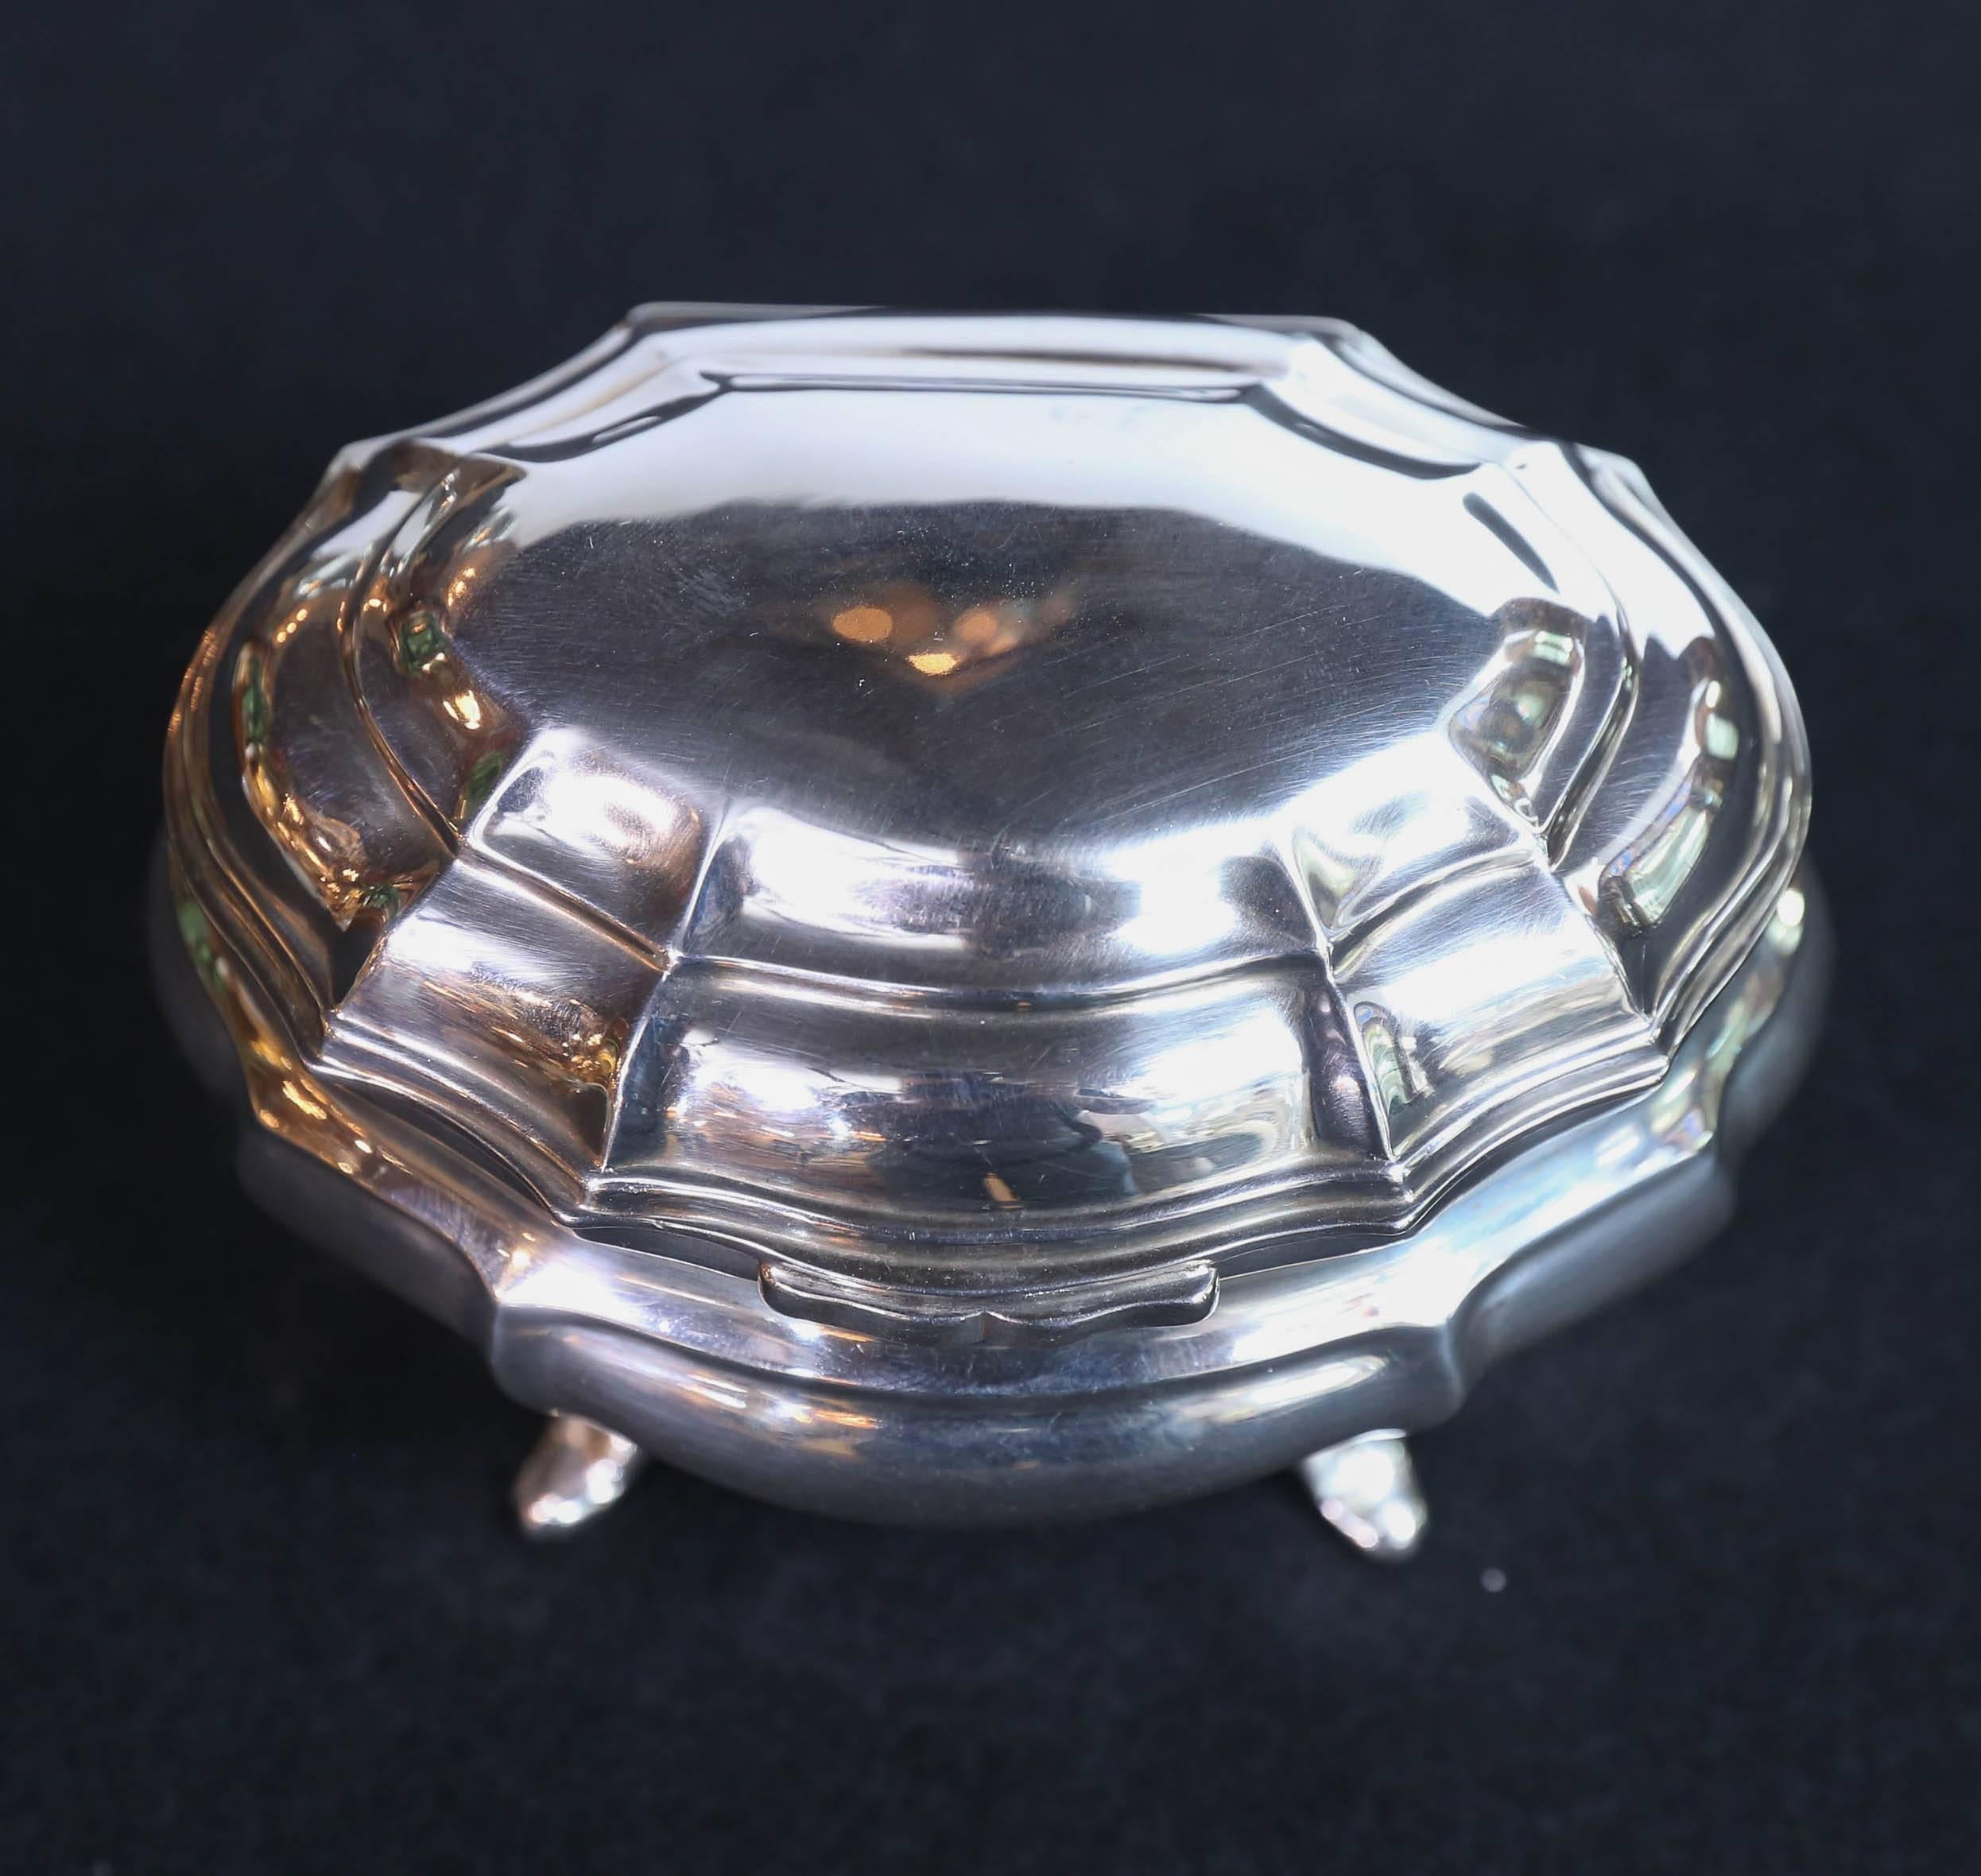 Lovely lidded oval decorative box that is footed. C and S silver hall marks
Bottom engraved goldsmiths and silversmiths, 112 regent street.